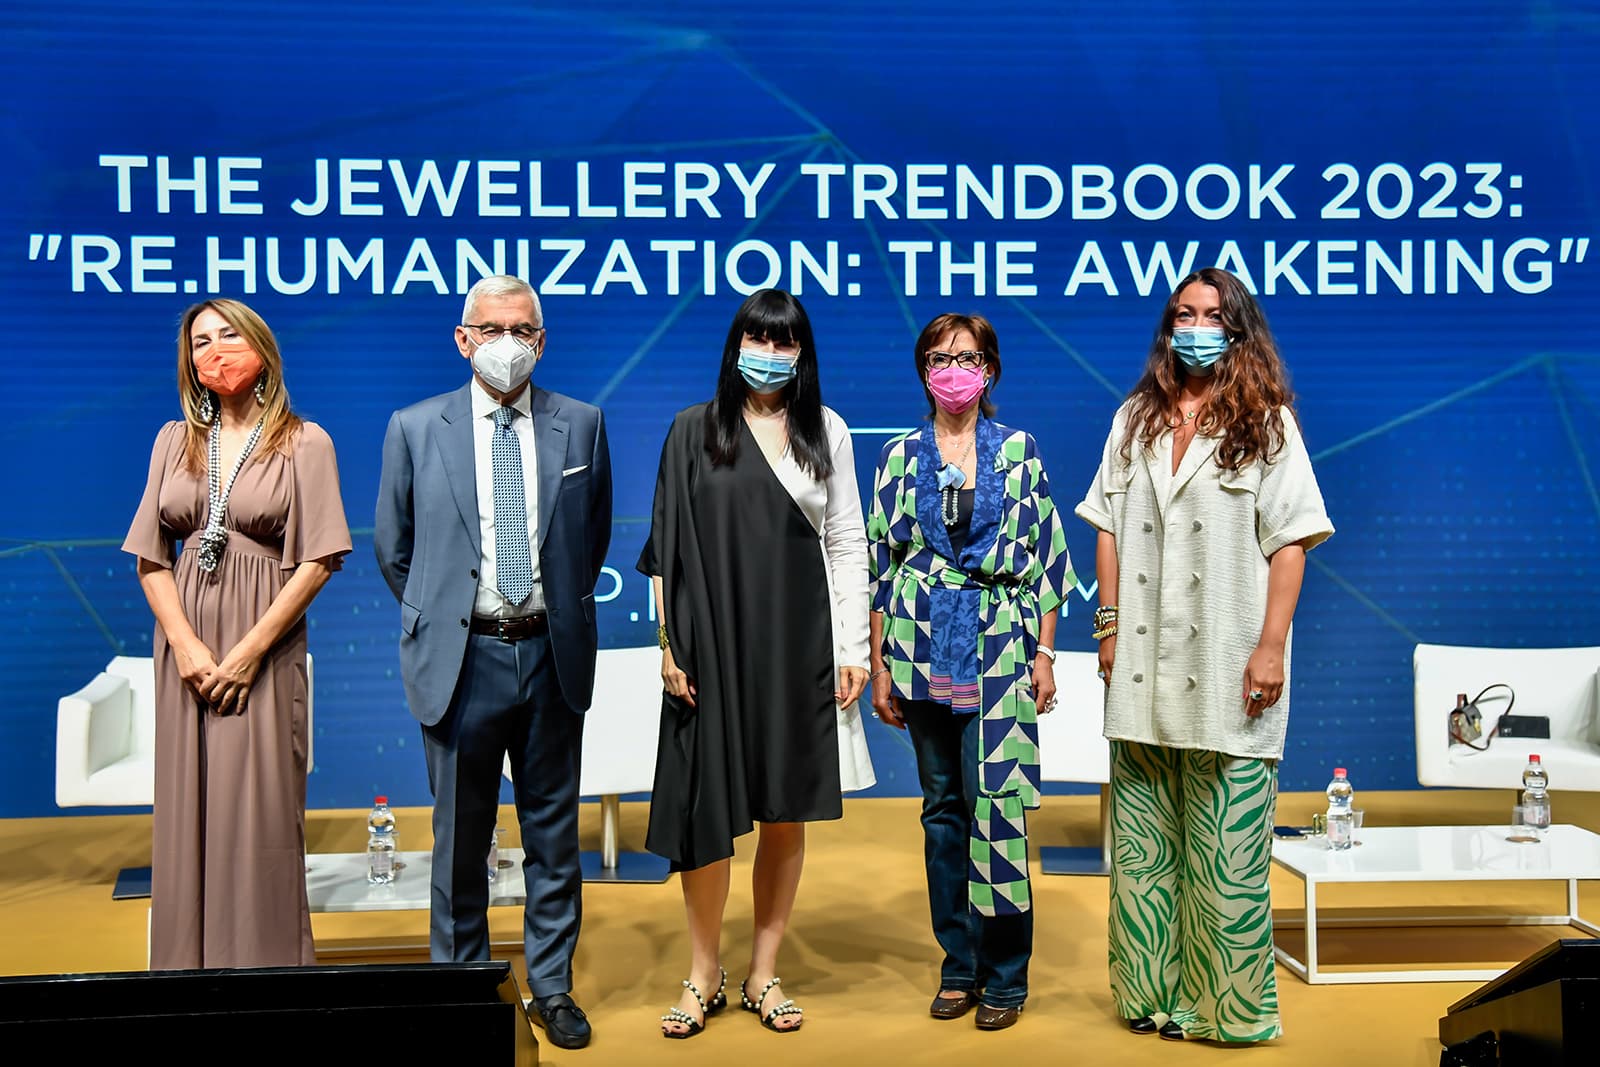 Vicenzaoro: what will the jewellery landscape of the future look like?